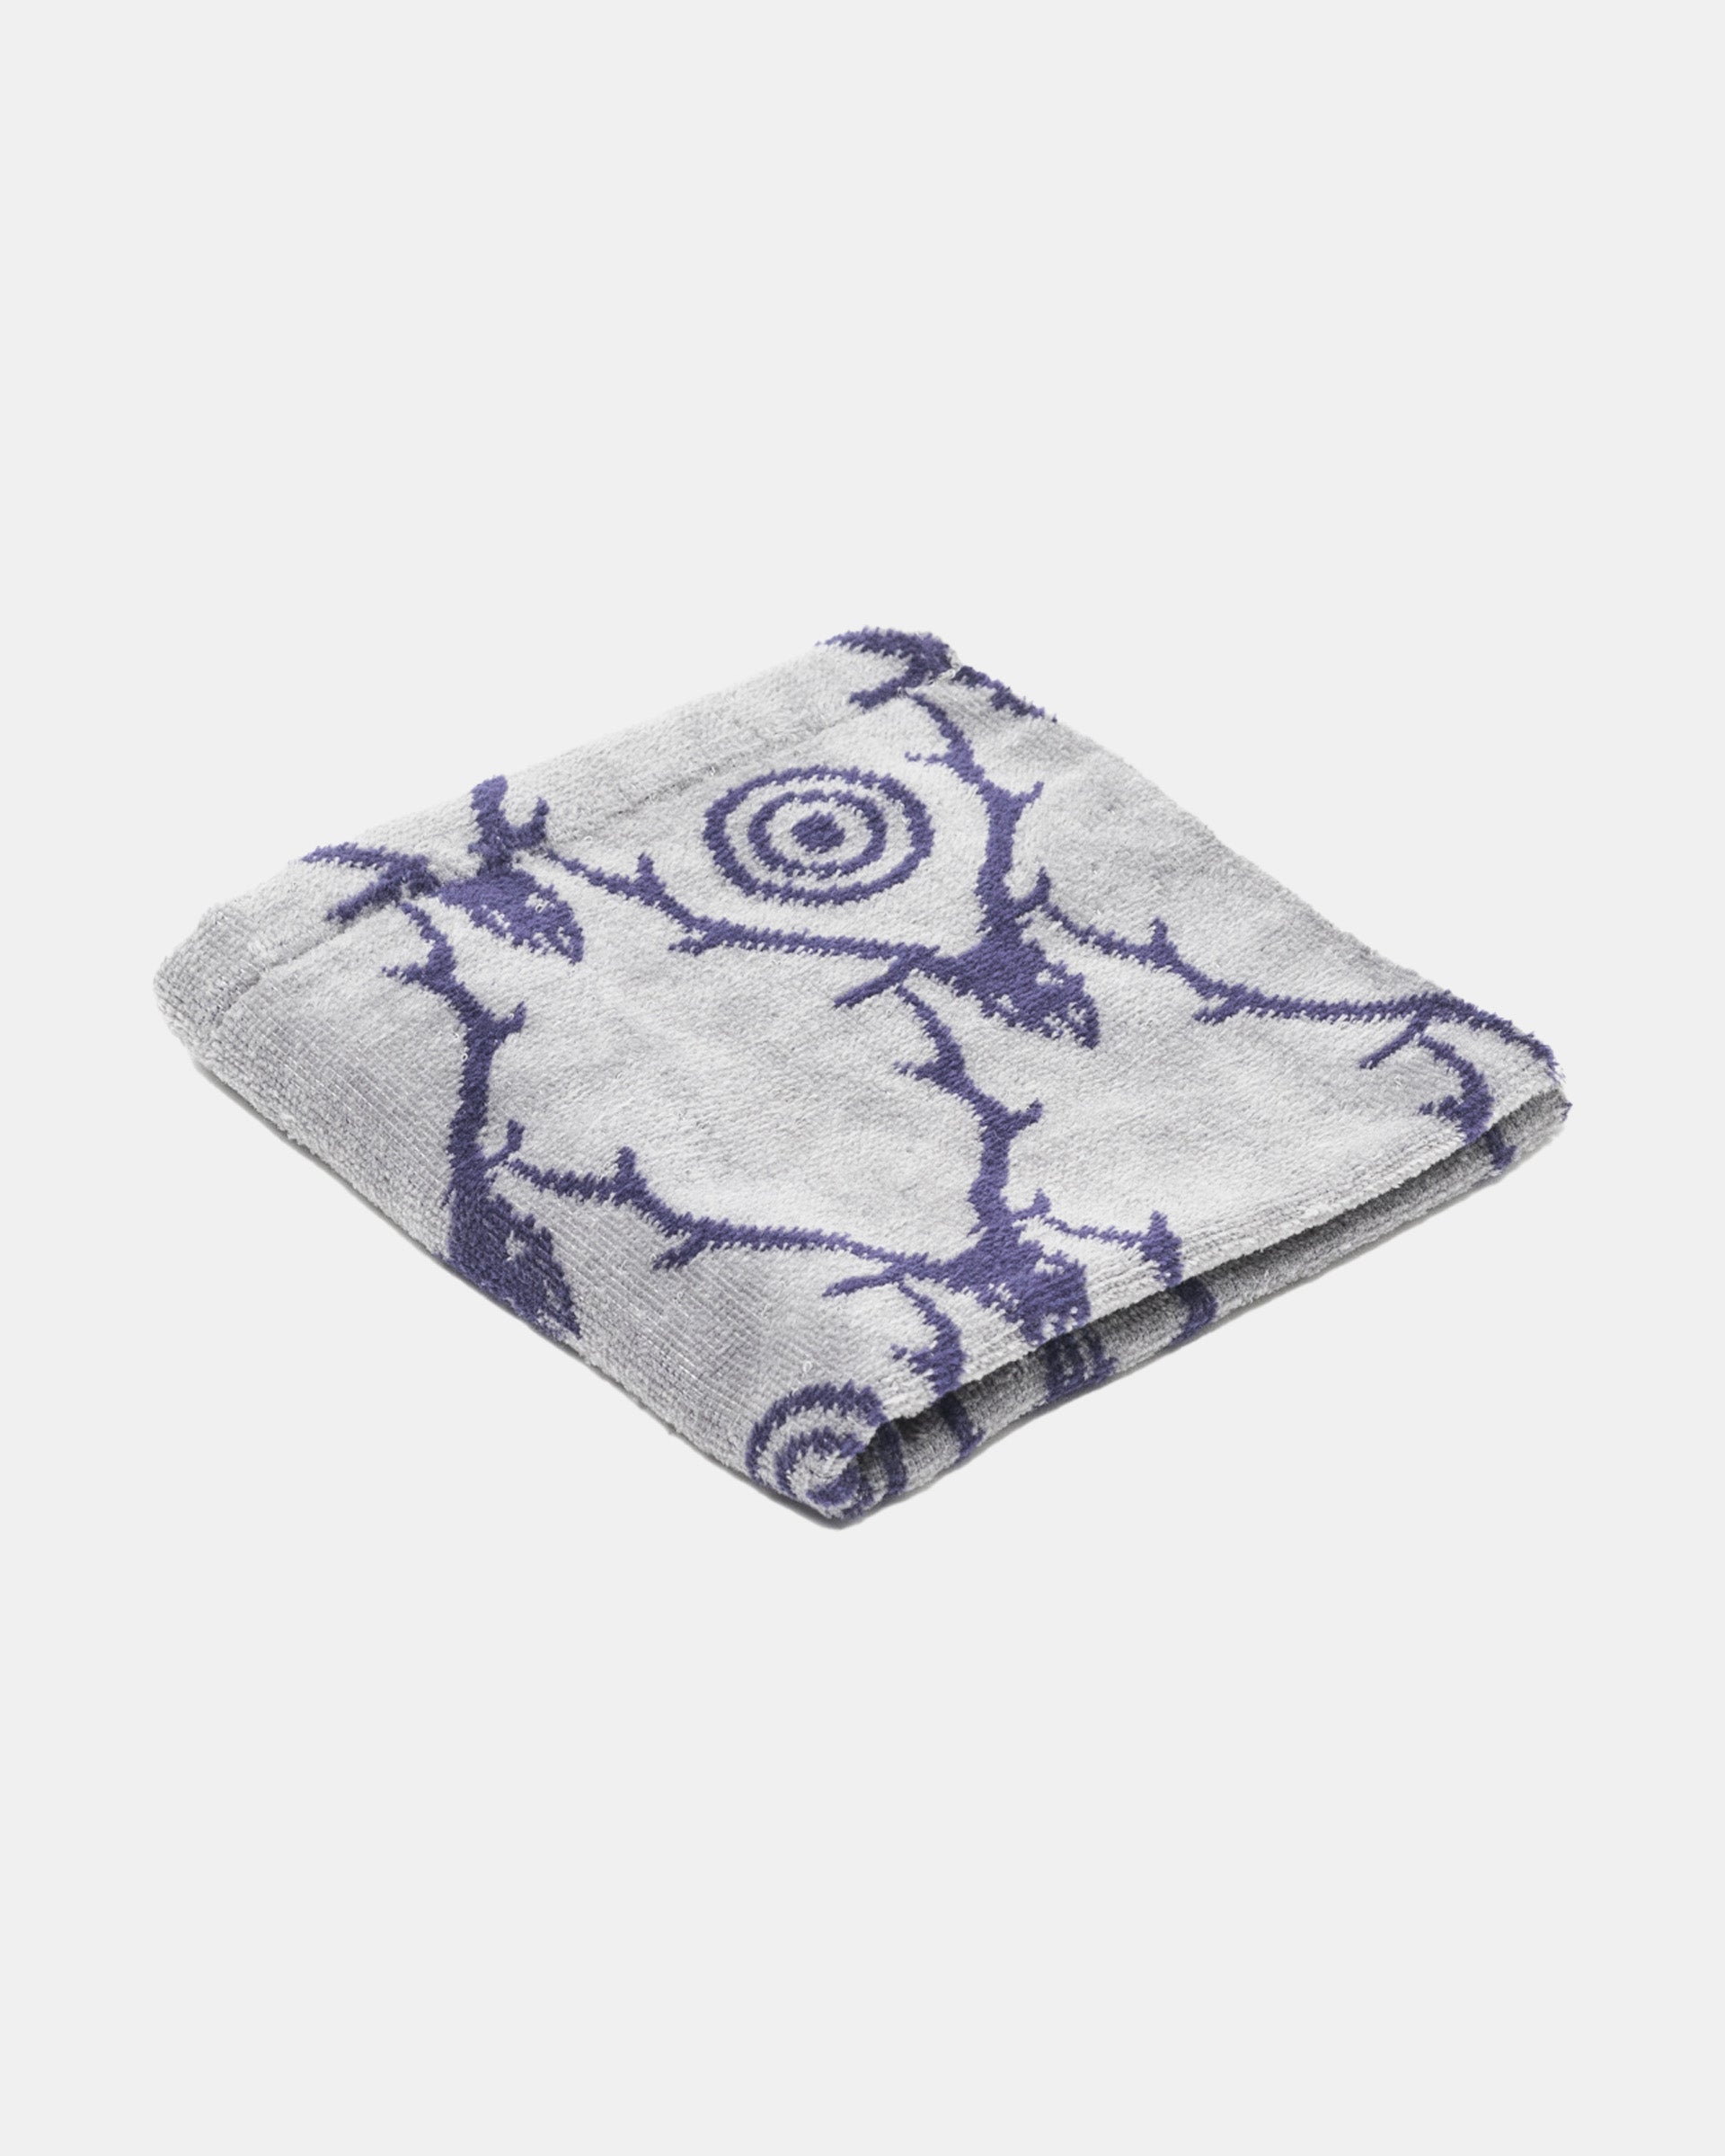 Wash Towel in Grey and Purple